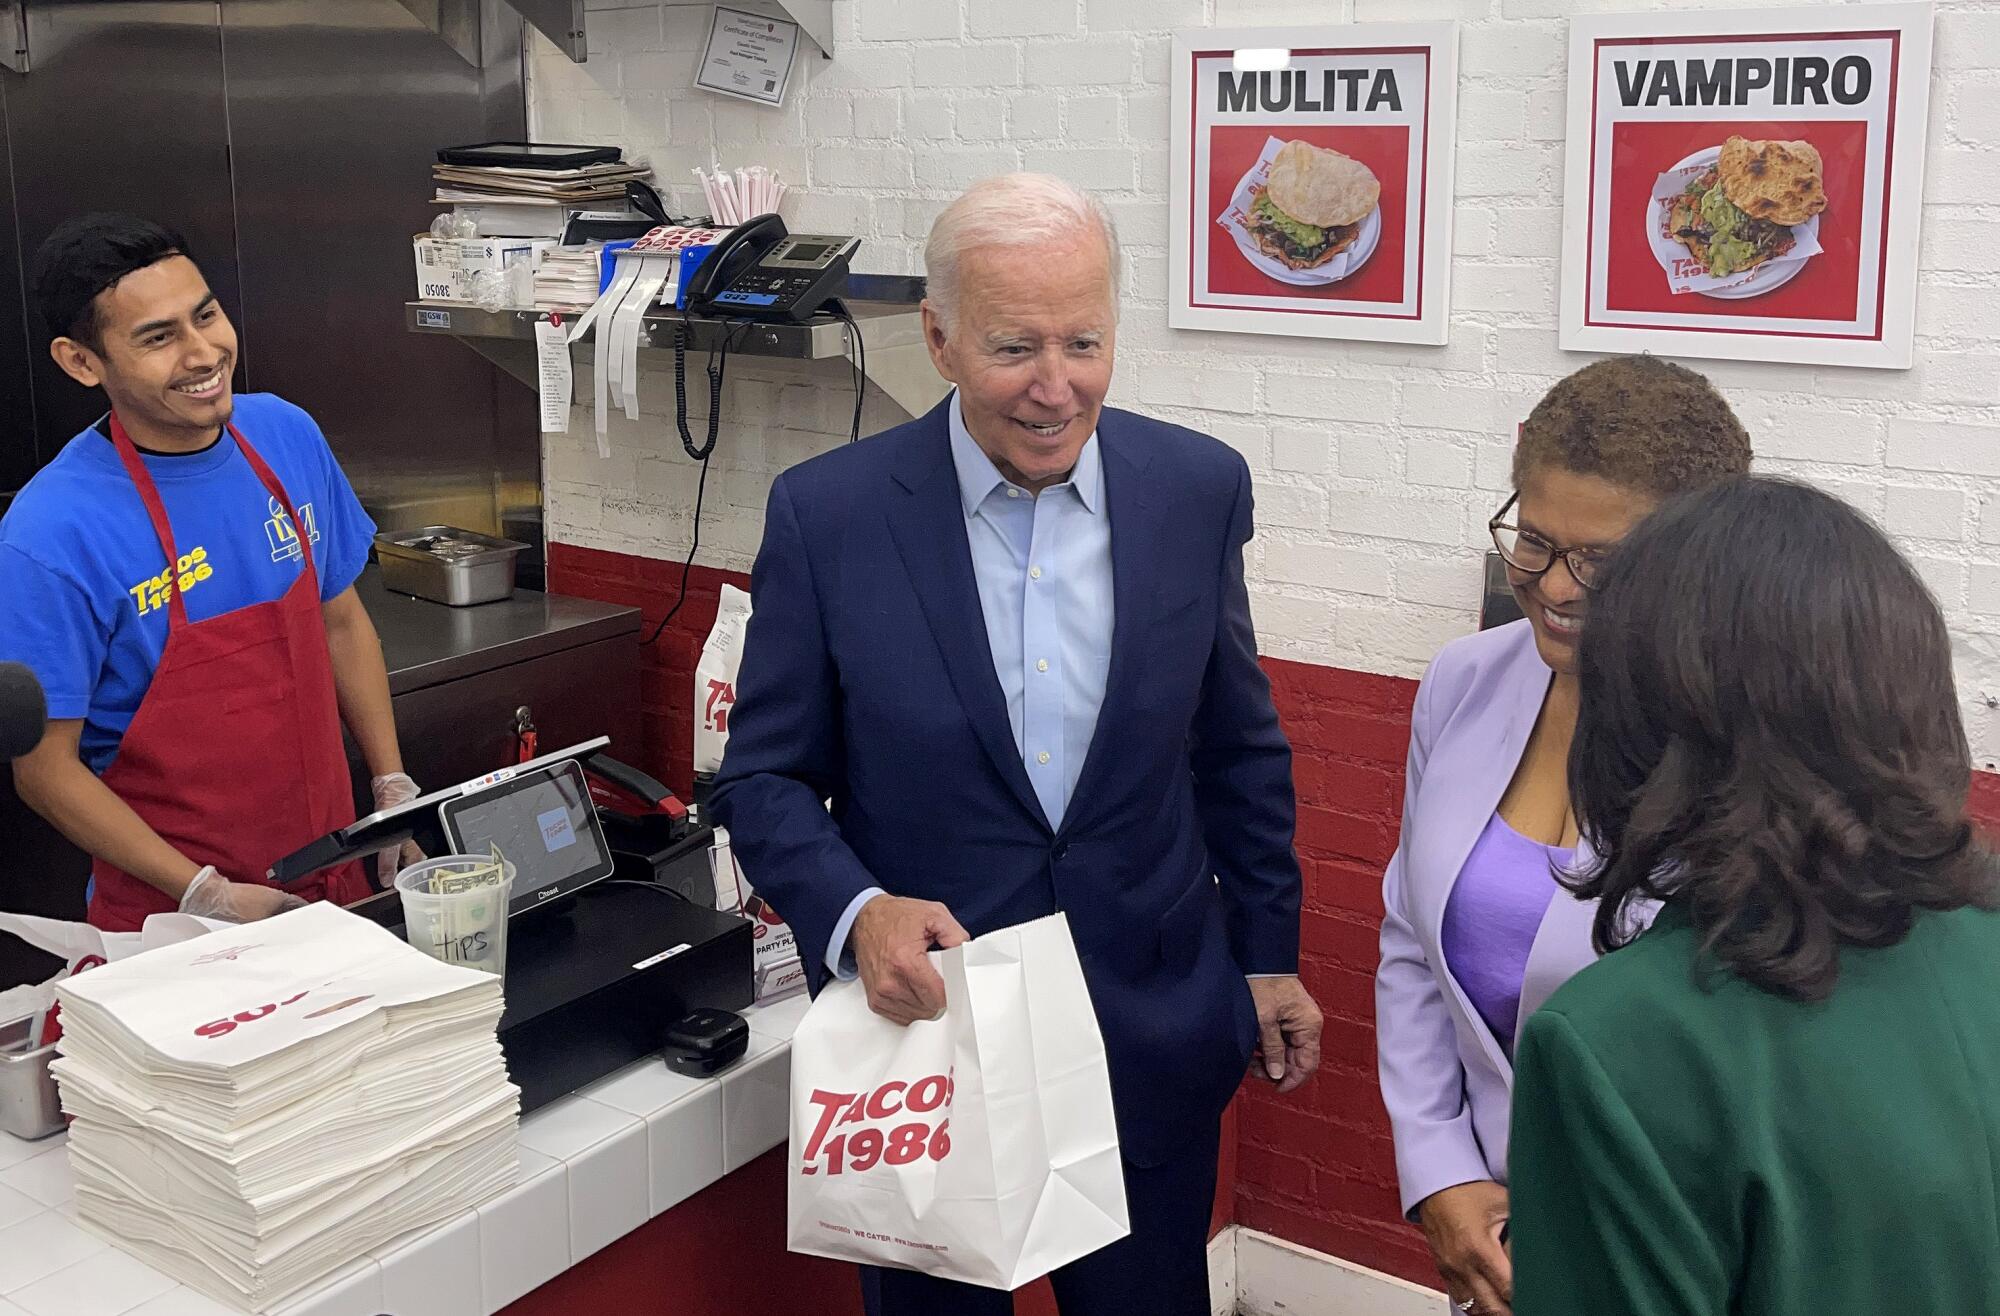 President Joe Biden made a stop at Tacos 1986 in Westwood